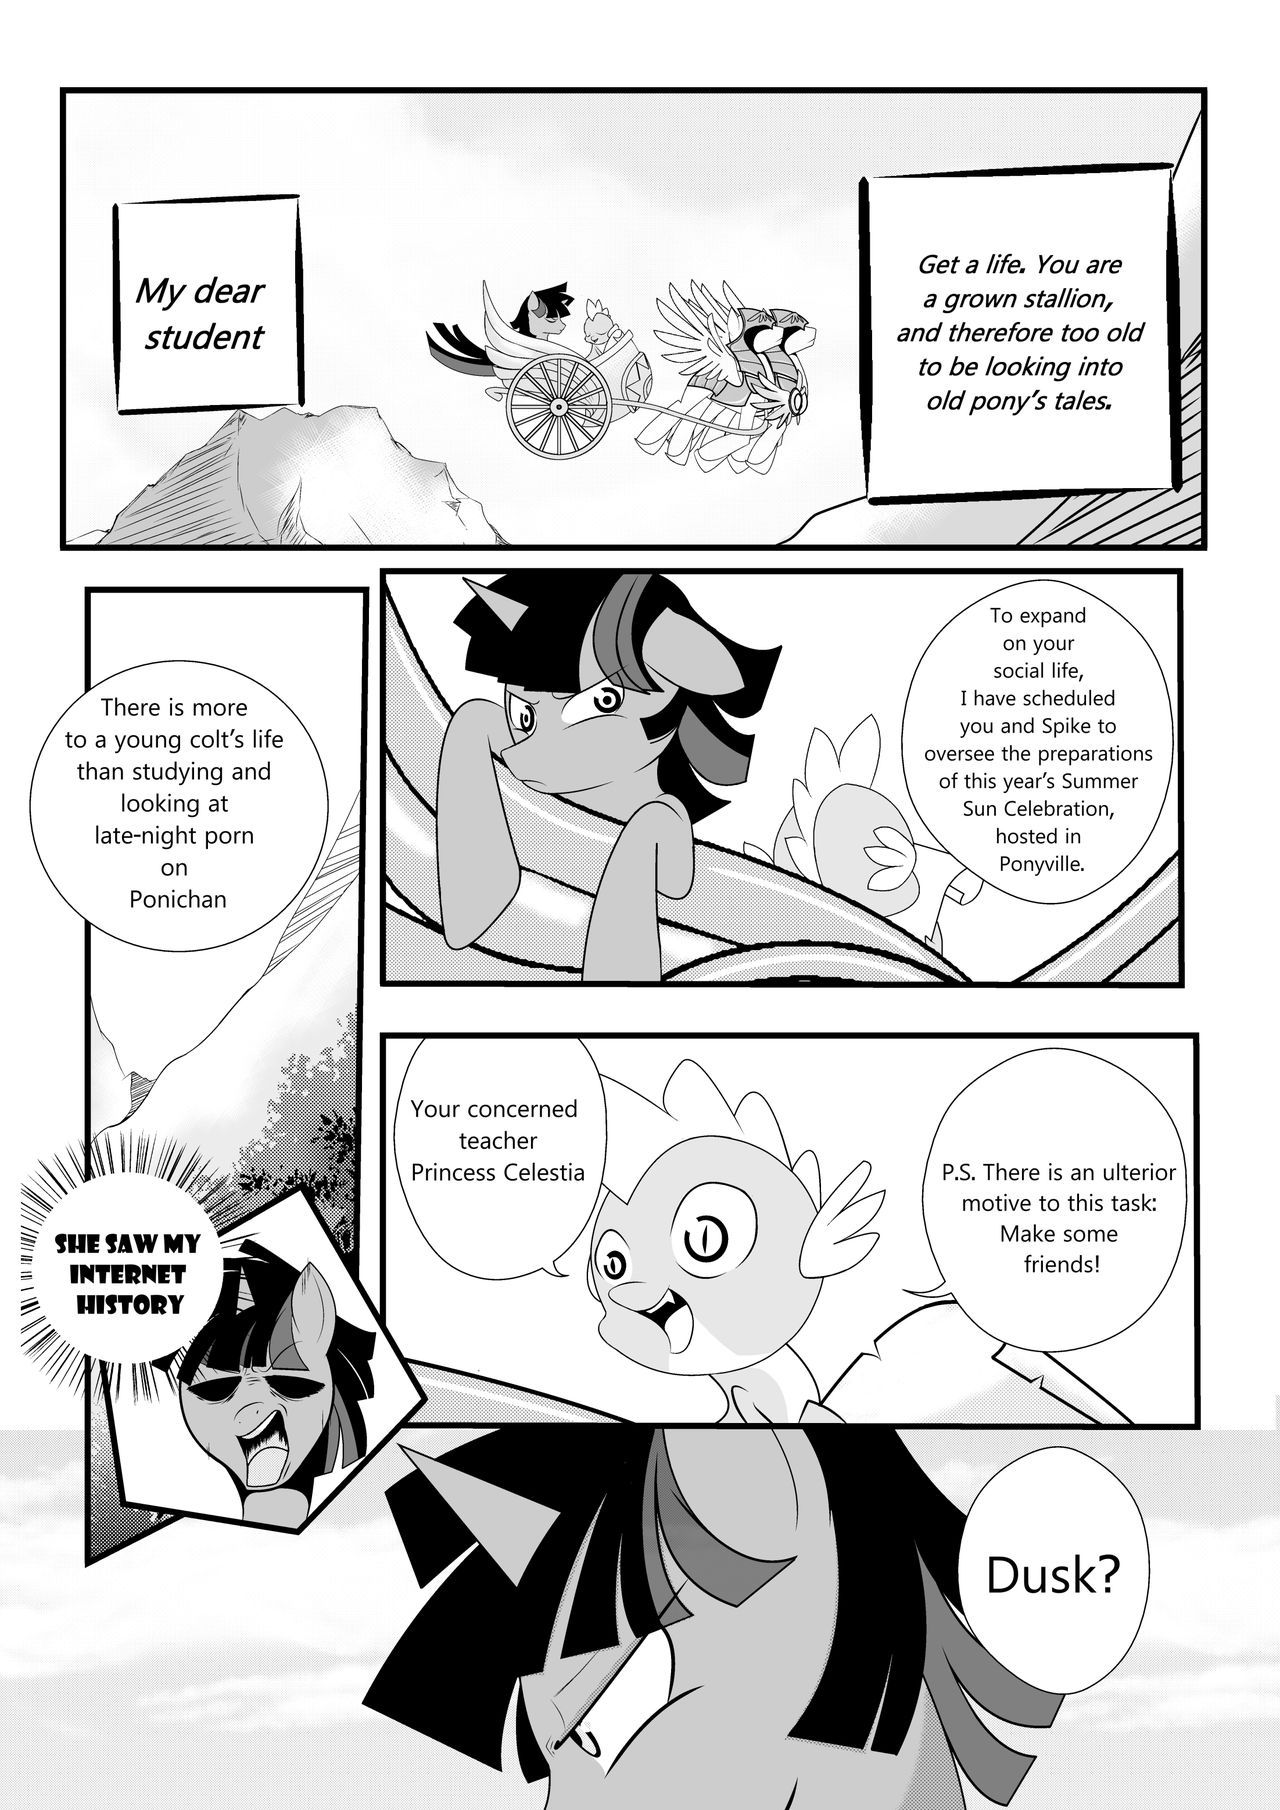 The Unexpected Love Life of Dusk Shine - Hi-Res [ENG] (in progress) 11